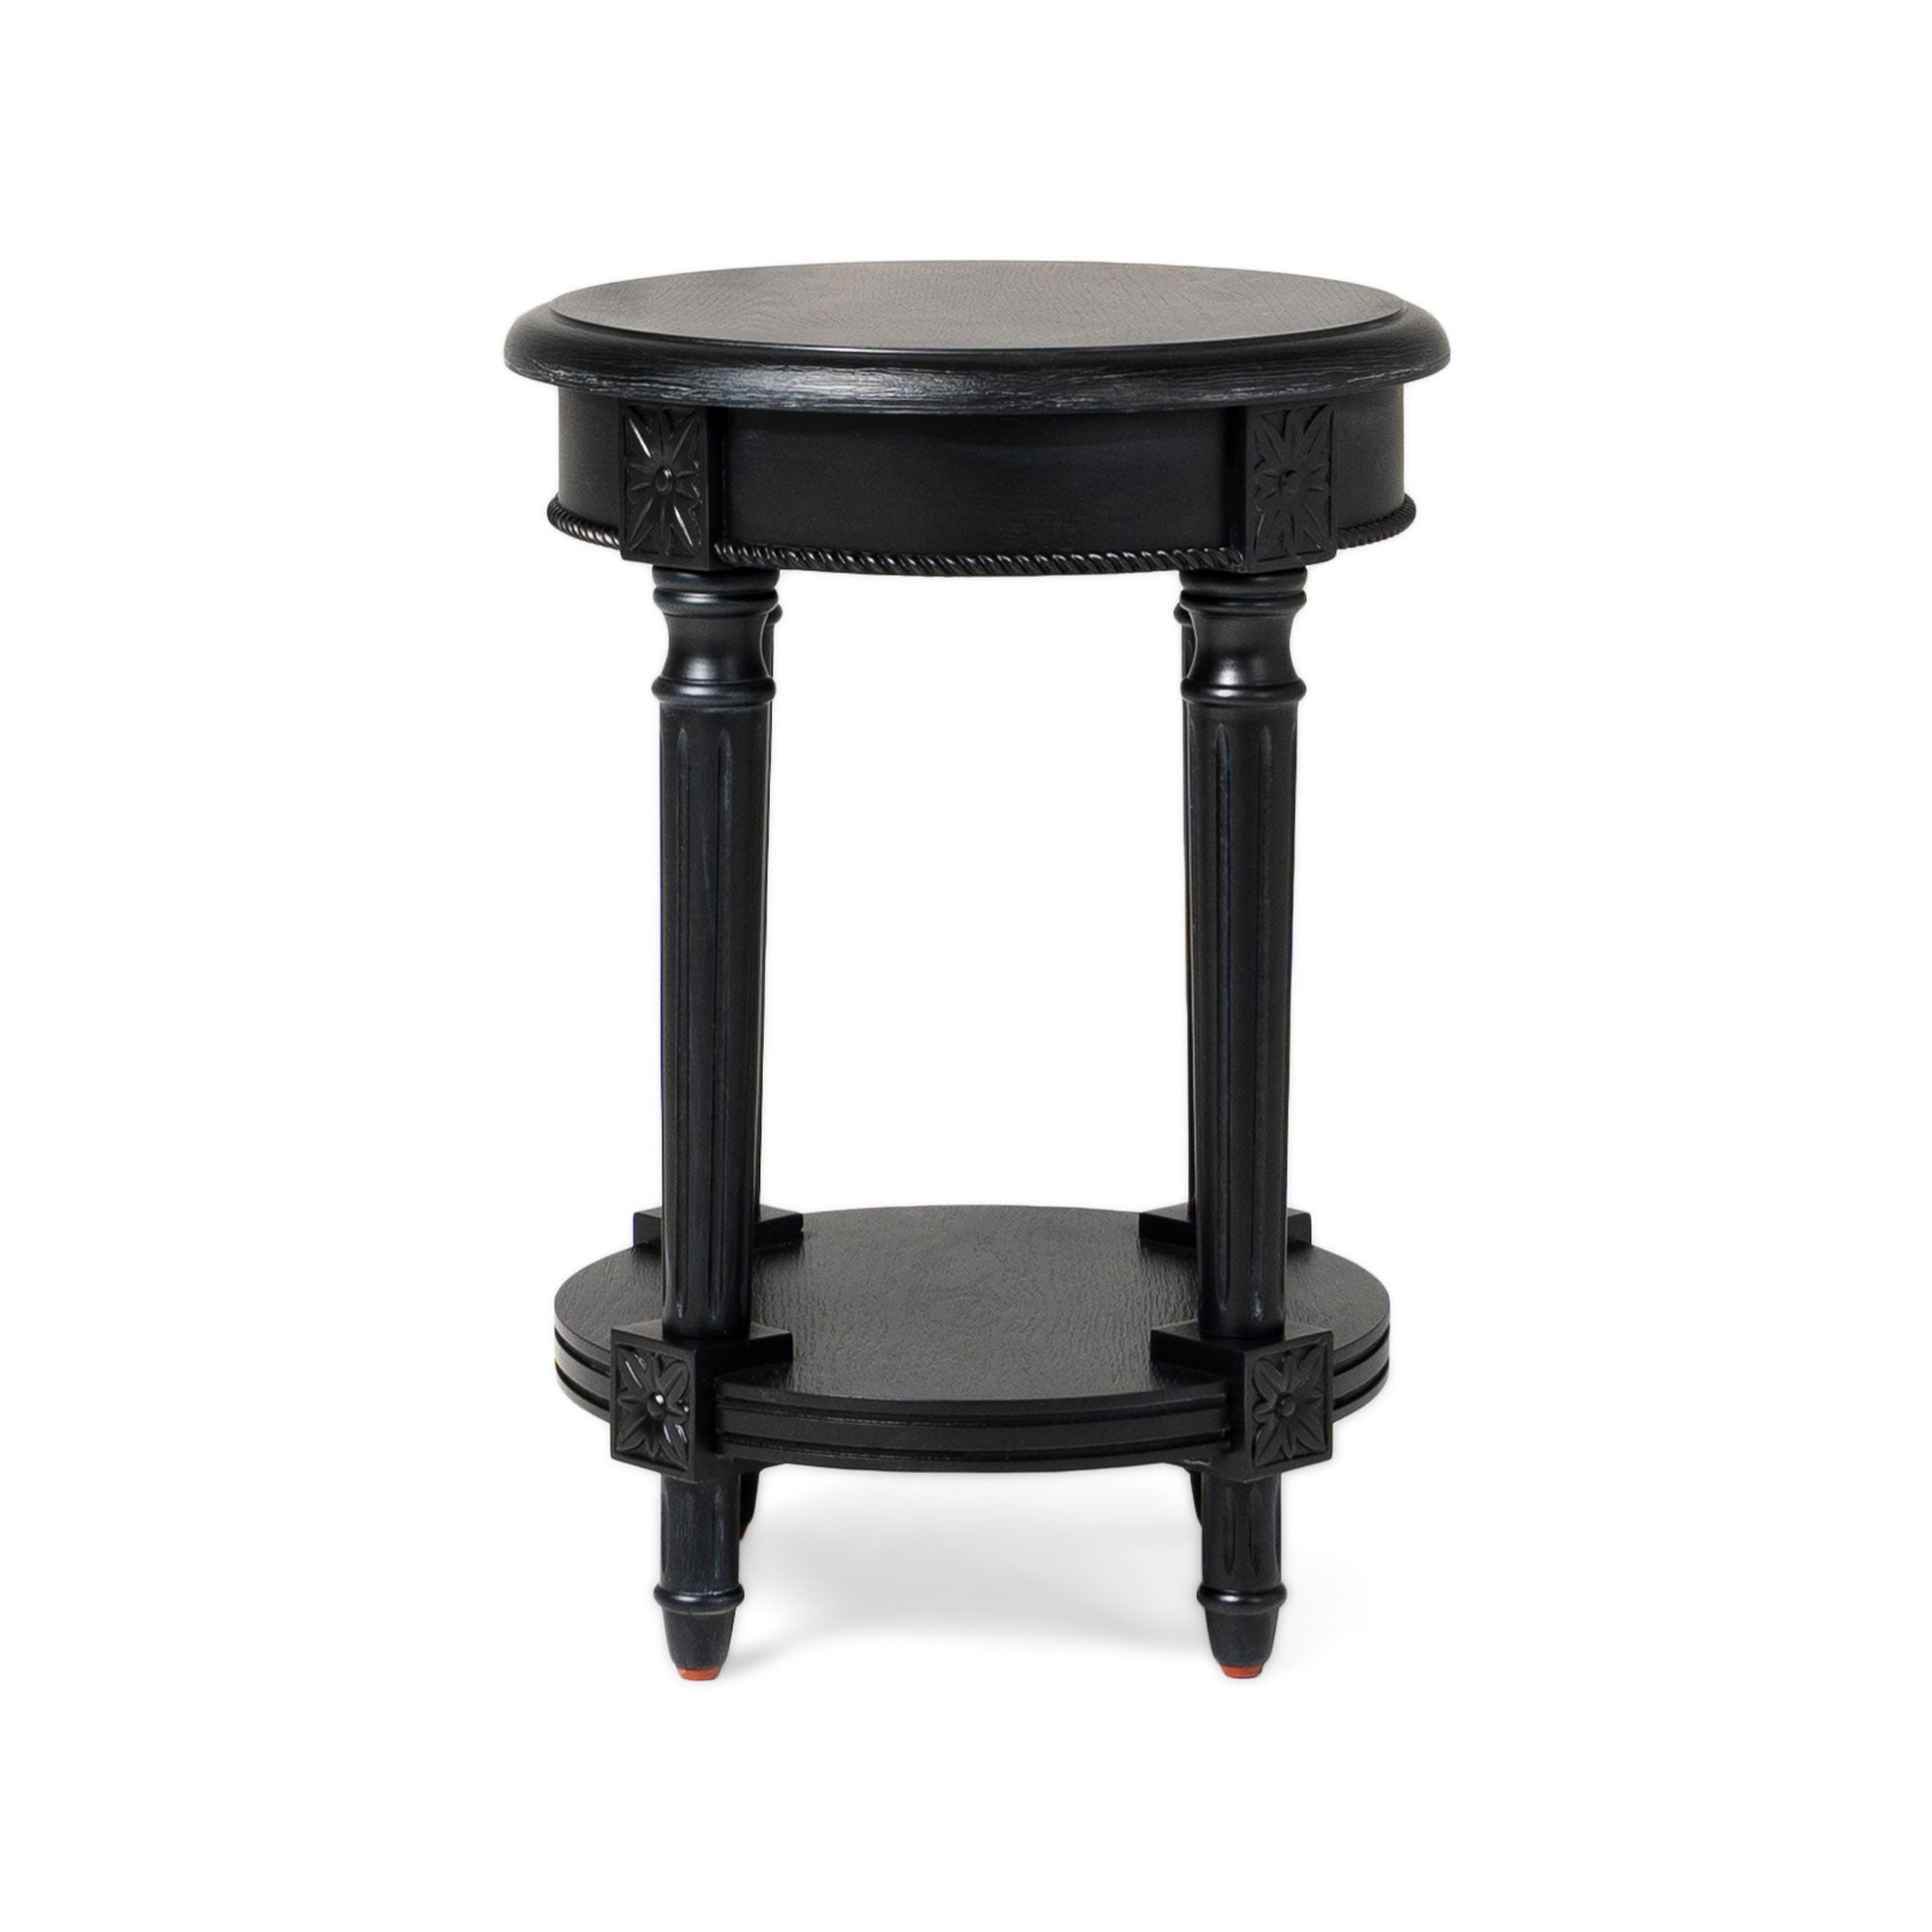 Pullman Traditional Round Wooden Side Table in Antiqued Black Finish in Accent Tables by Maven Lane